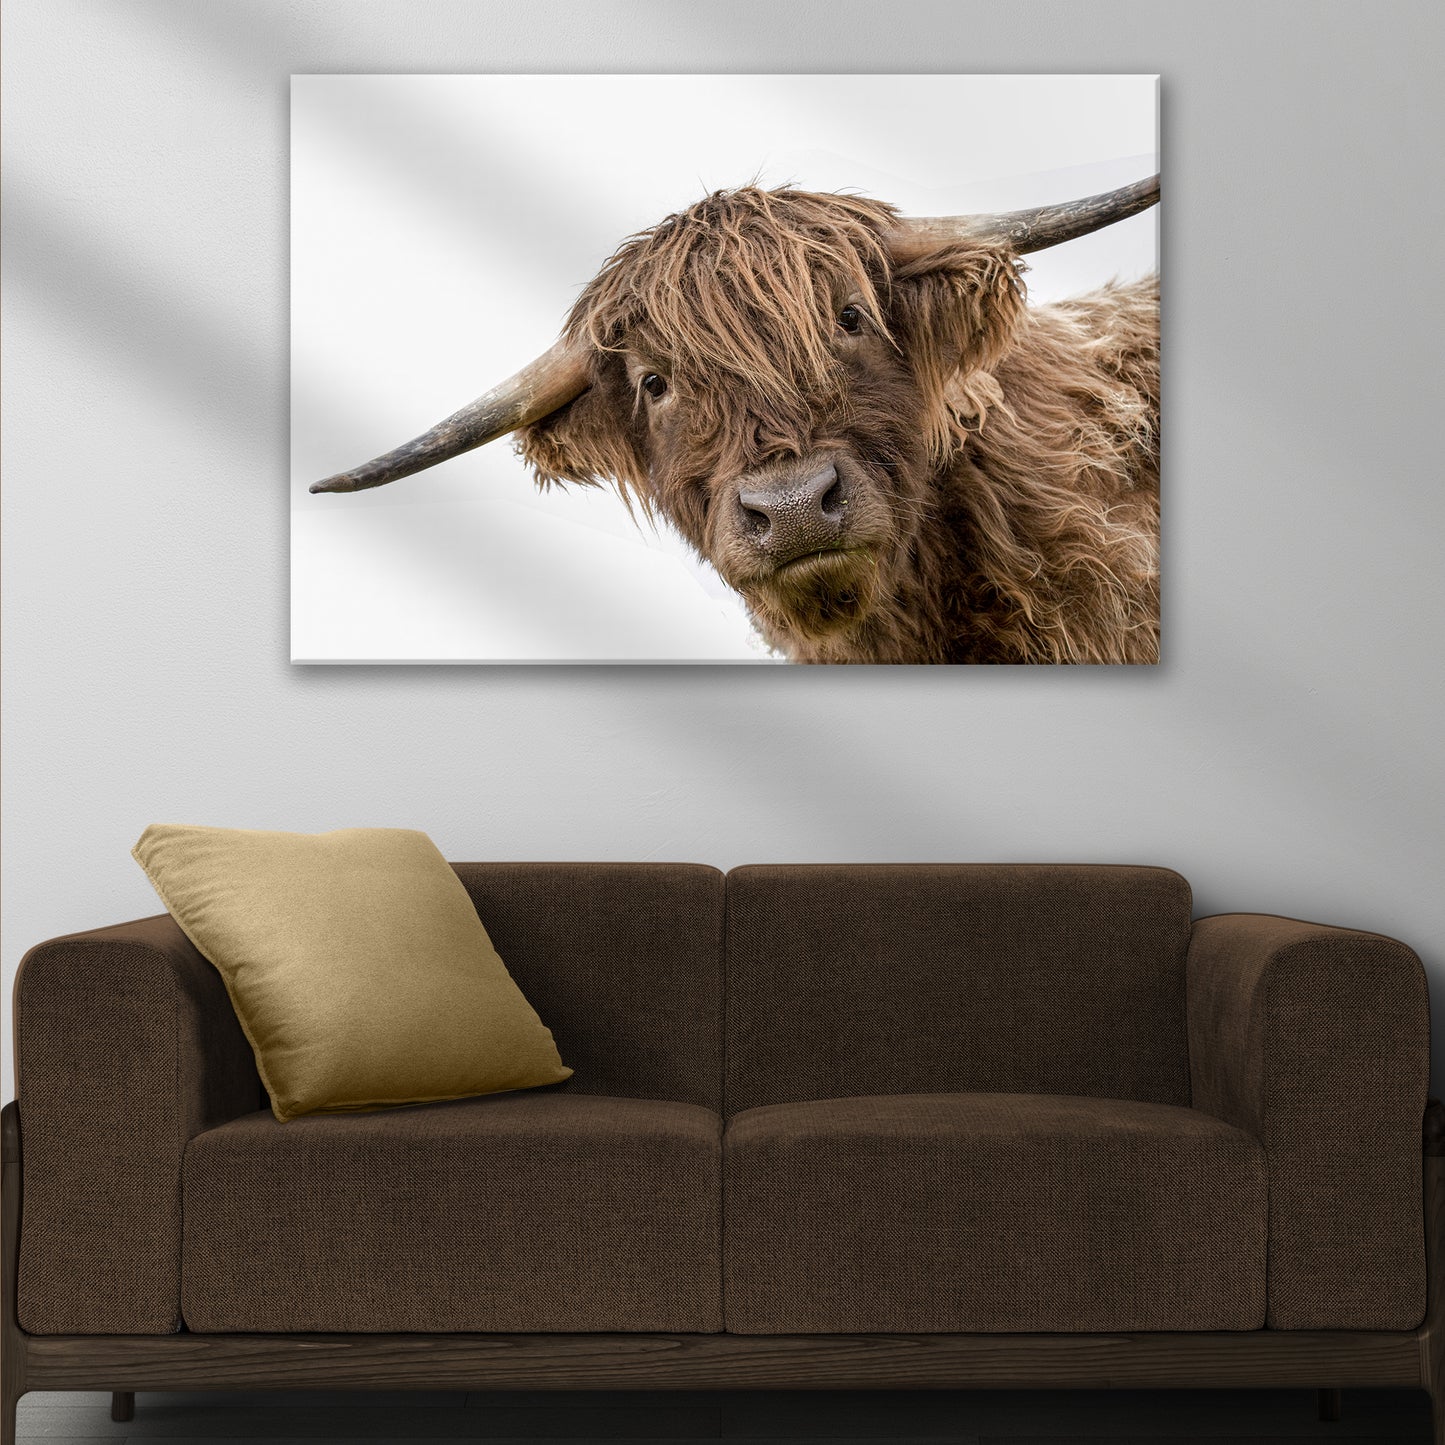 Curious Highland Cow Canvas Wall Art Style 2 - Image by Tailored Canvases